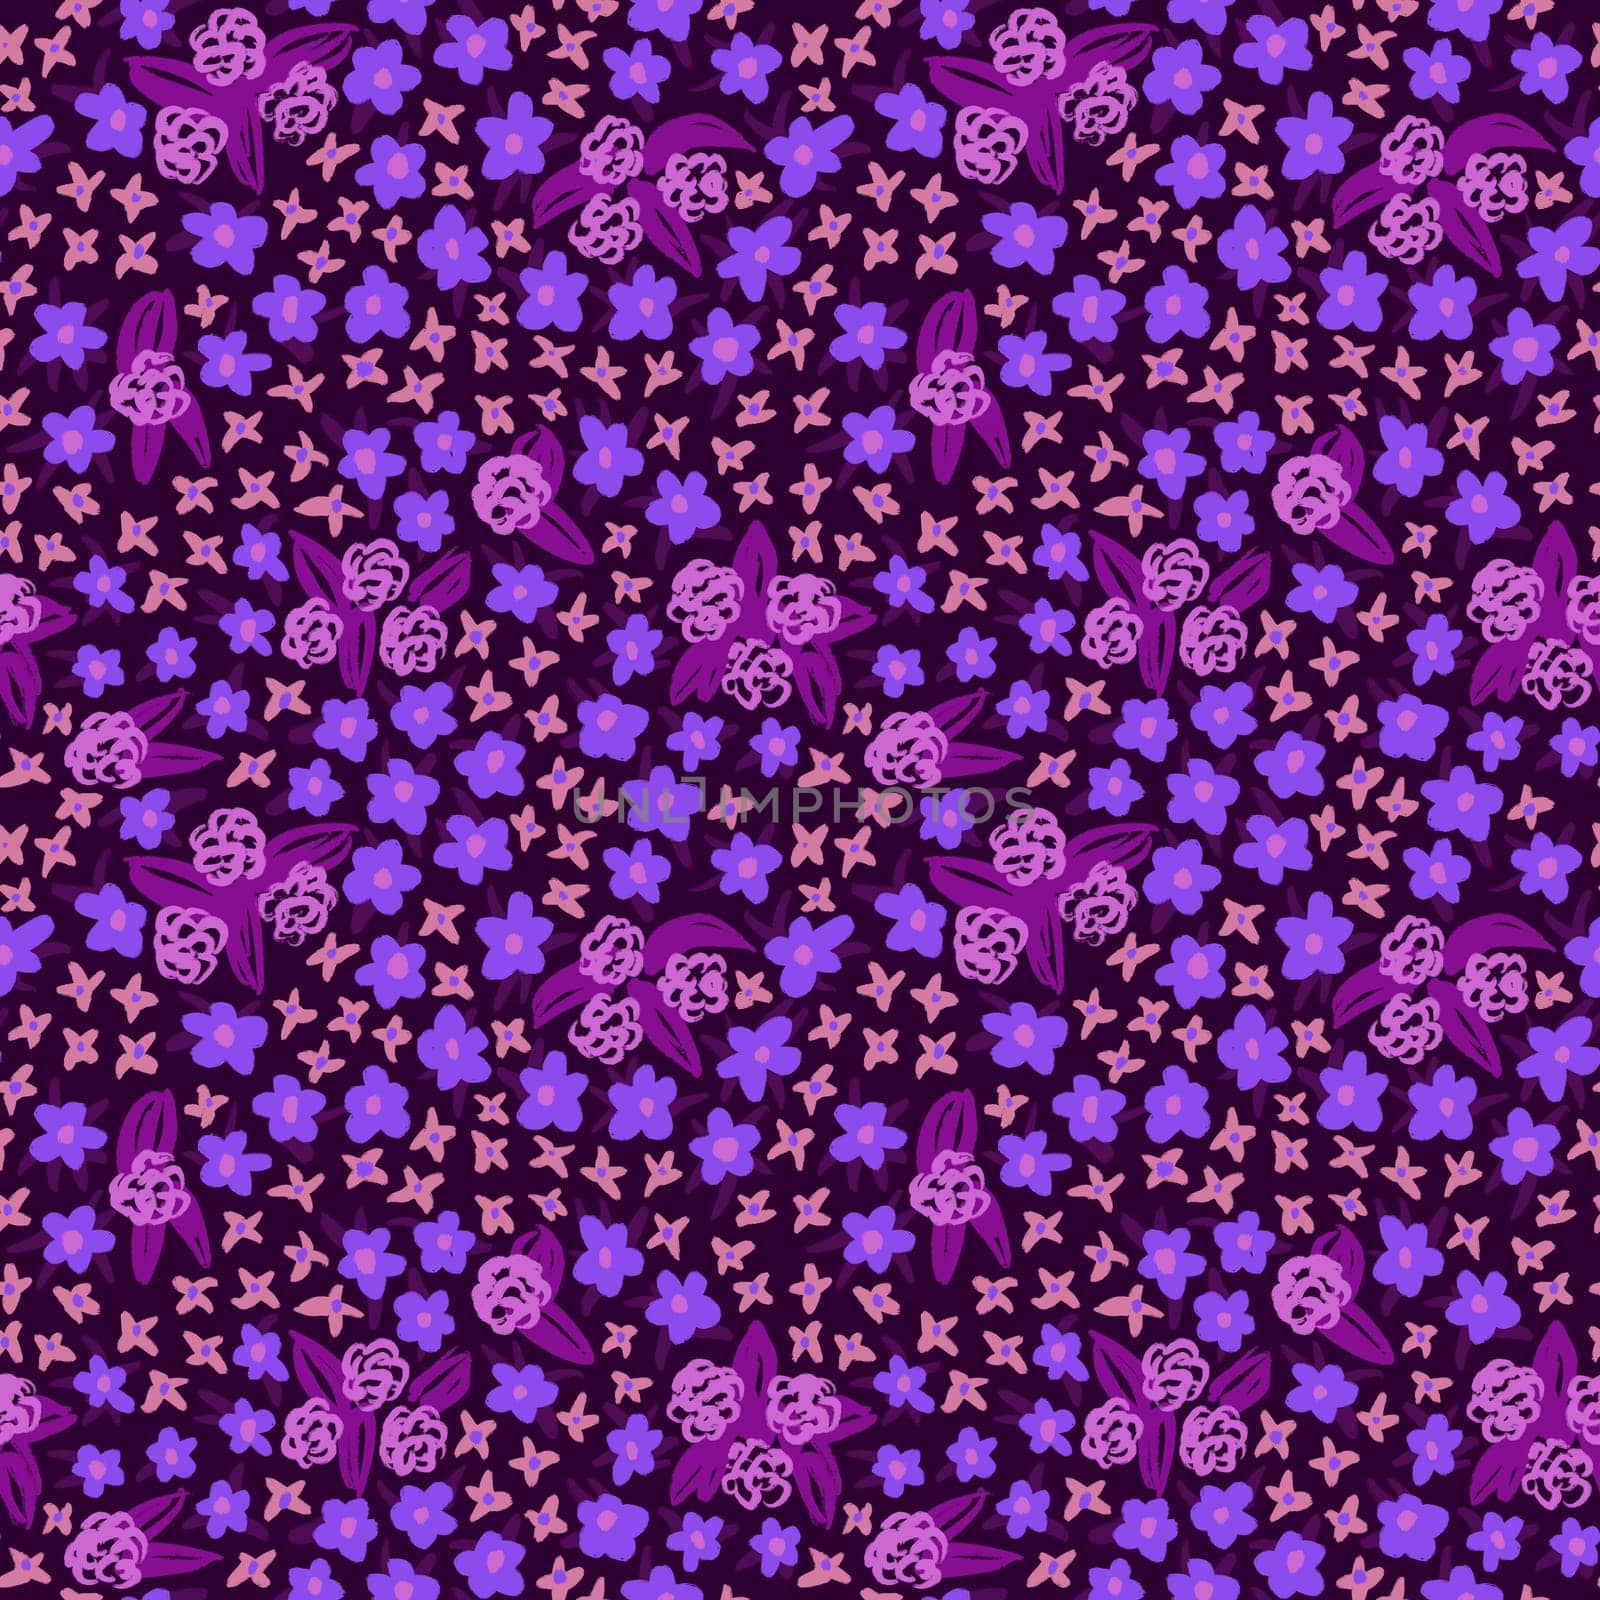 Hand drawn seamless pattern with blue dark purple flower floral elements, ditsy summer spring botanical nature print, bloom blossom stylized petals. Retro vintage fabric design, cute dots nature meadow. by Lagmar